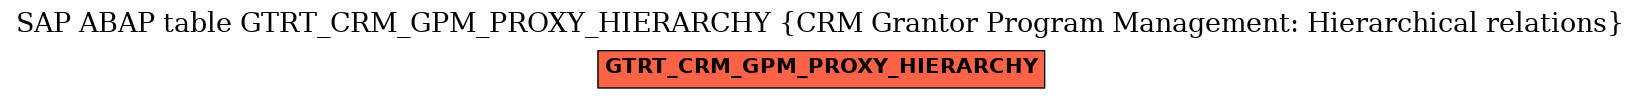 E-R Diagram for table GTRT_CRM_GPM_PROXY_HIERARCHY (CRM Grantor Program Management: Hierarchical relations)